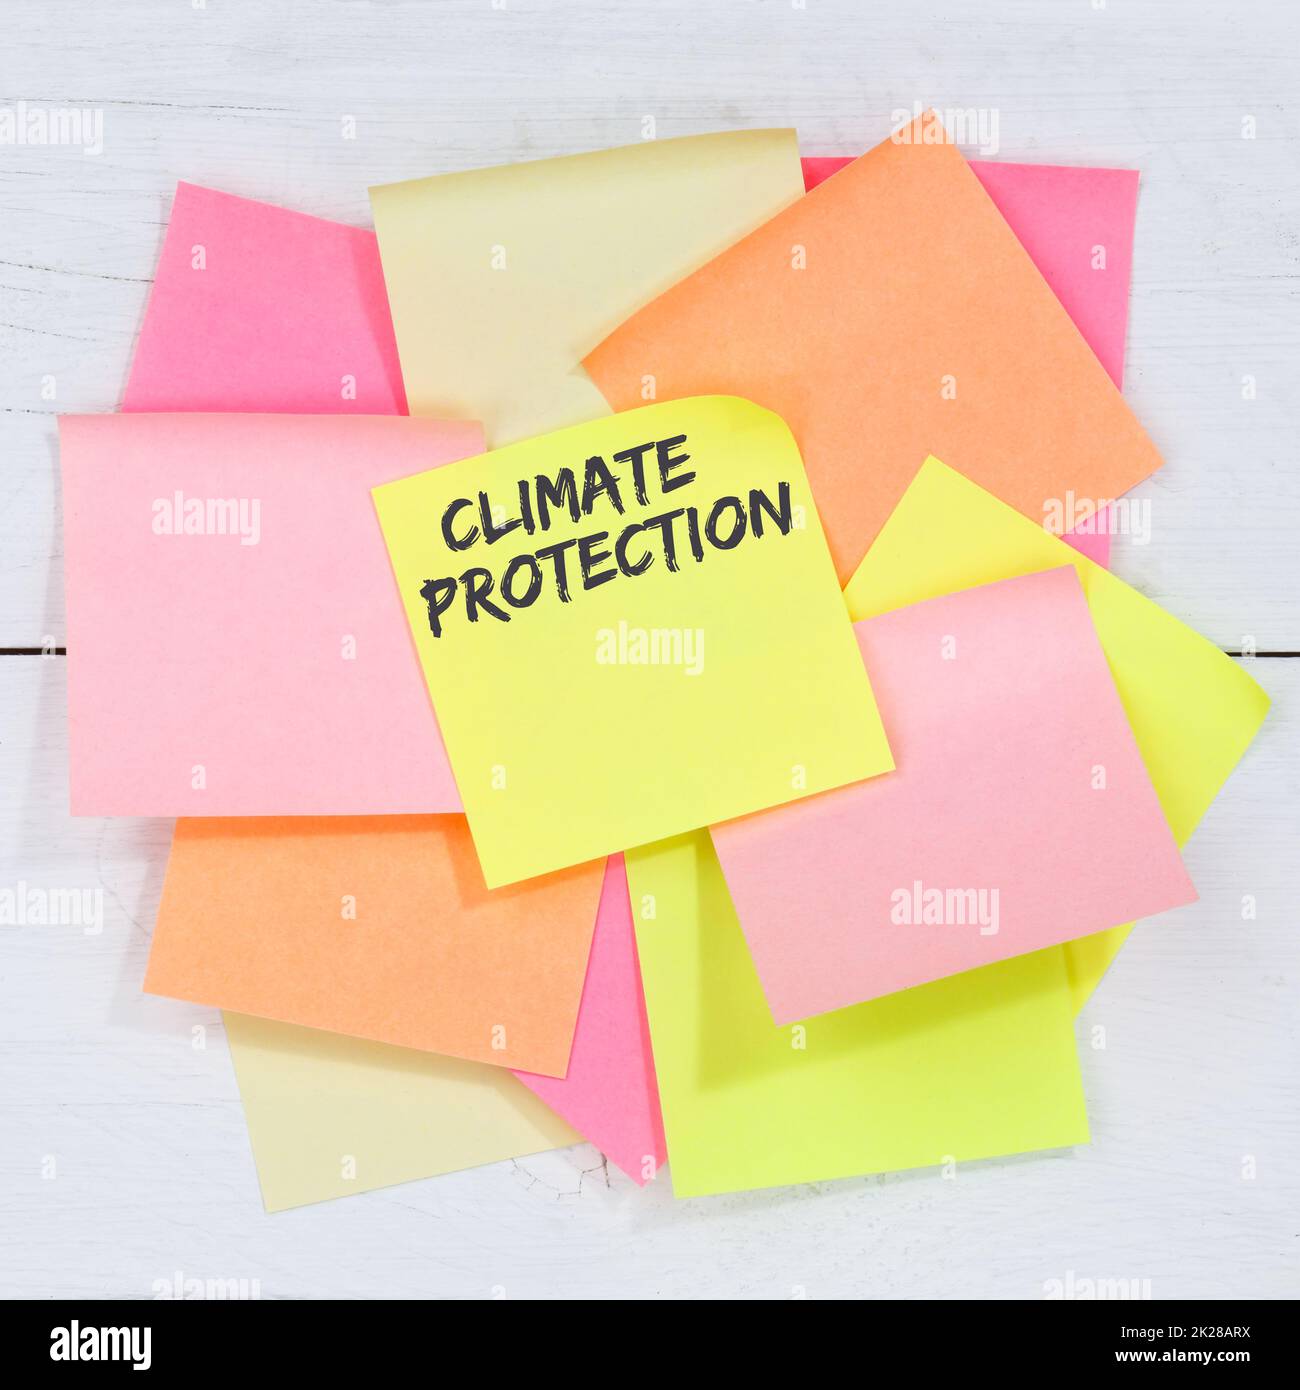 Climate protection change environment eco friendly nature conservation desk note paper Stock Photo